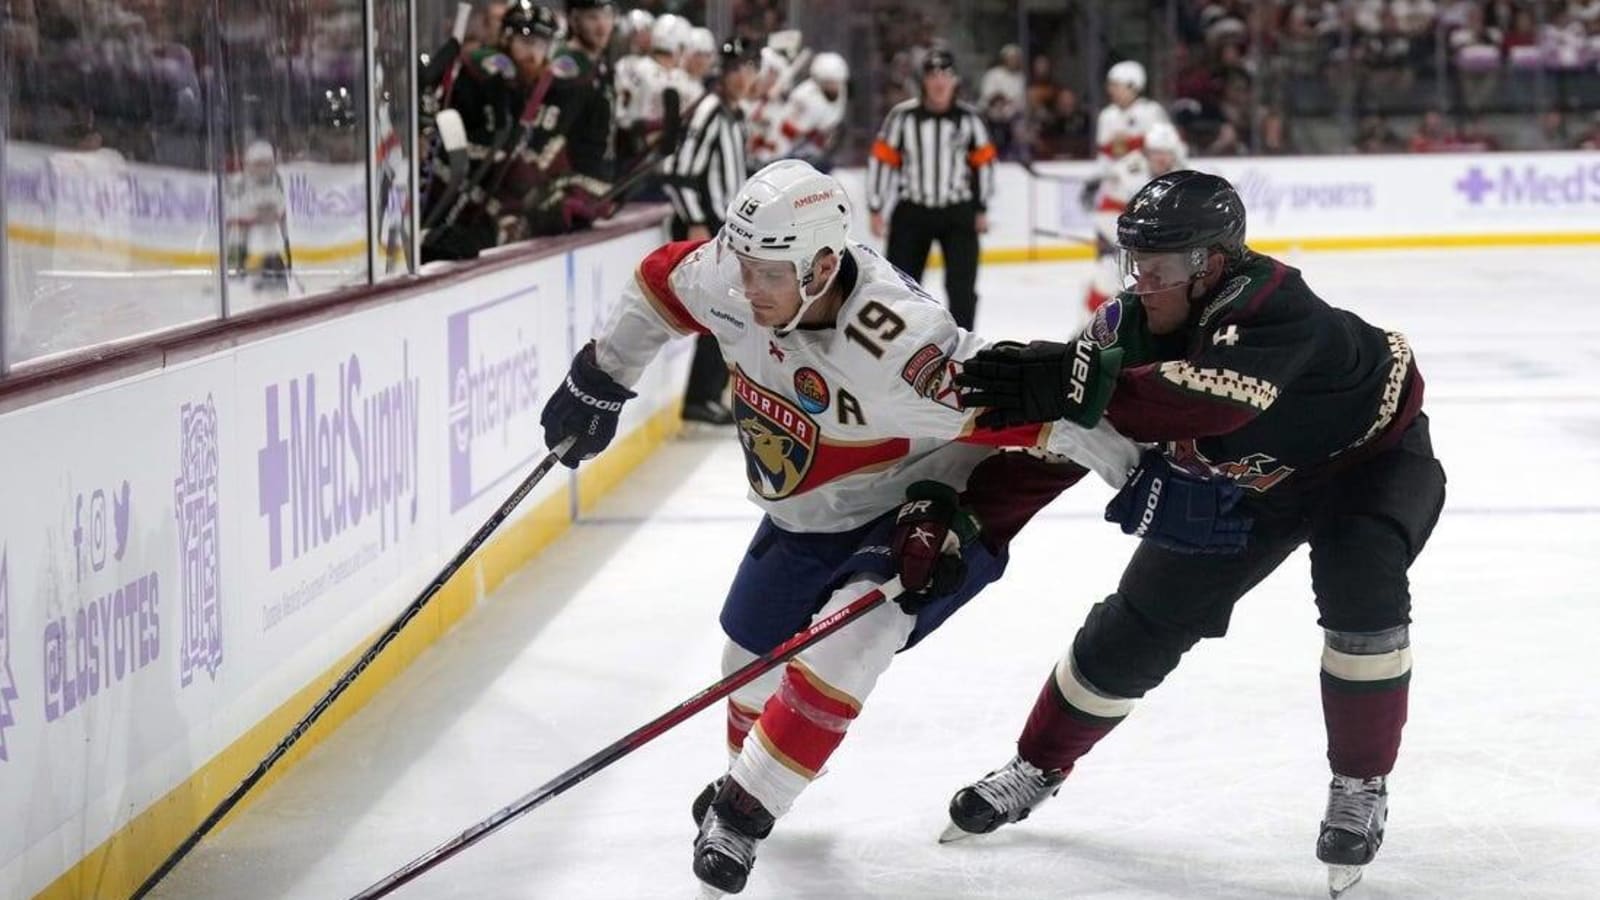 Coyotes down Panthers for first win at new home venue